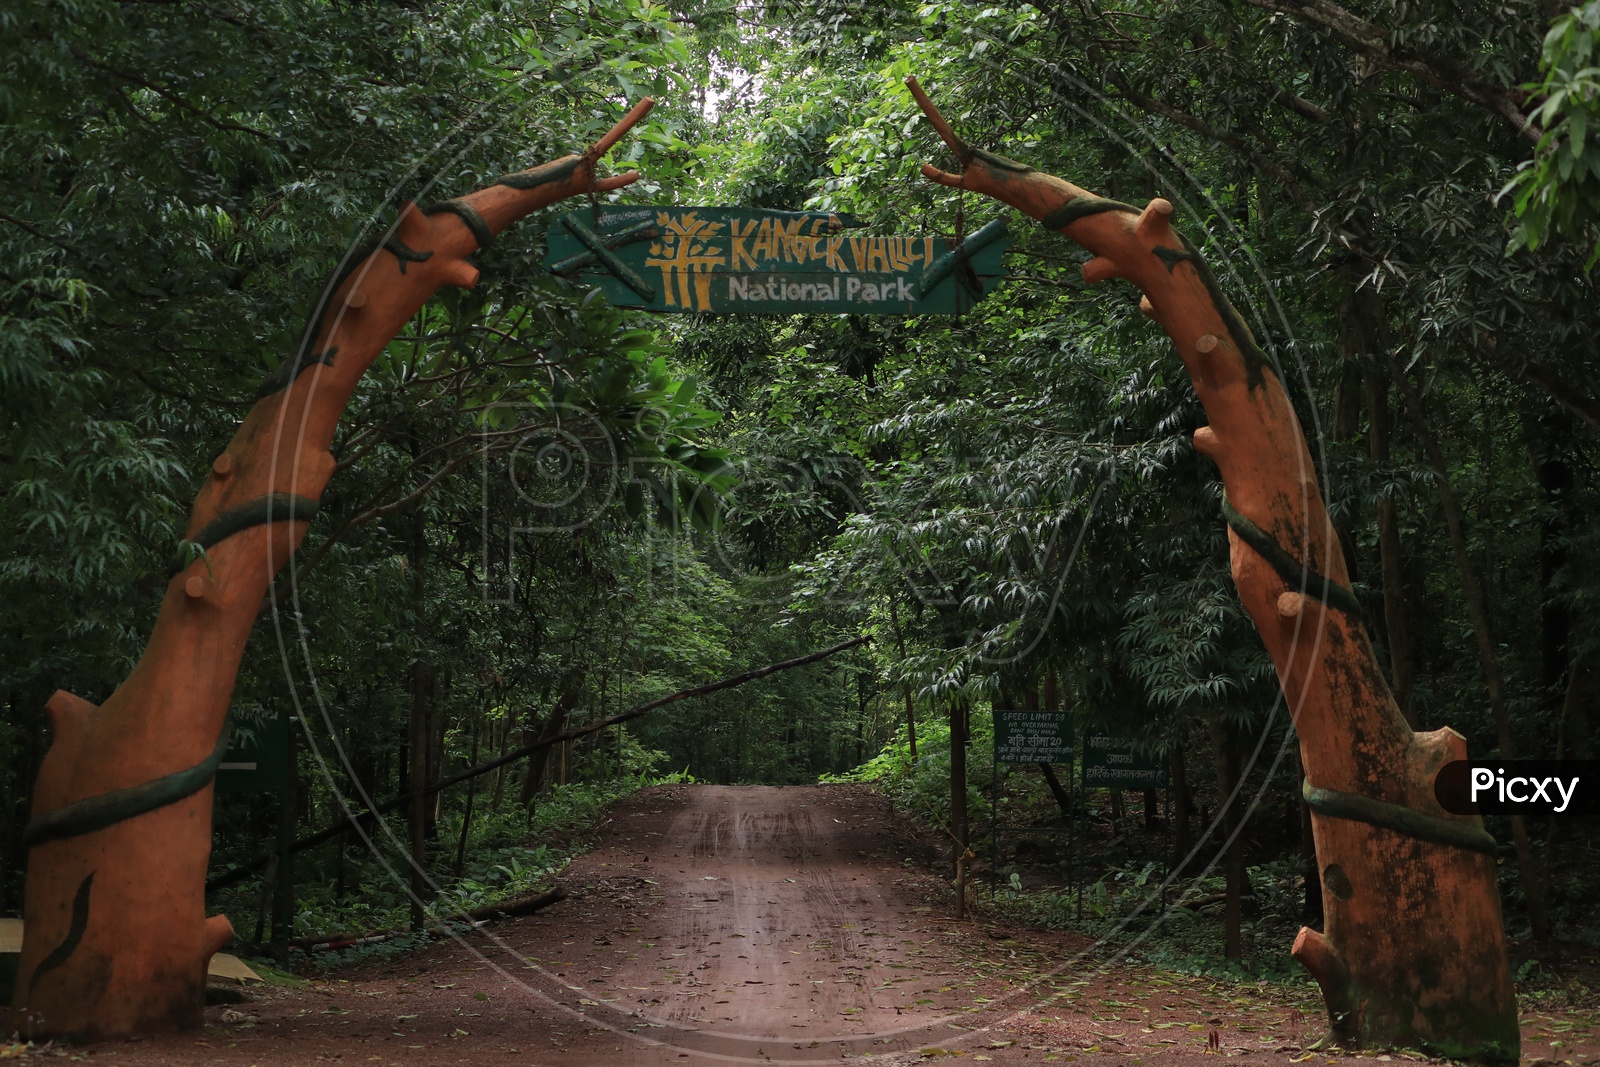 Arch of an entrance to the National park